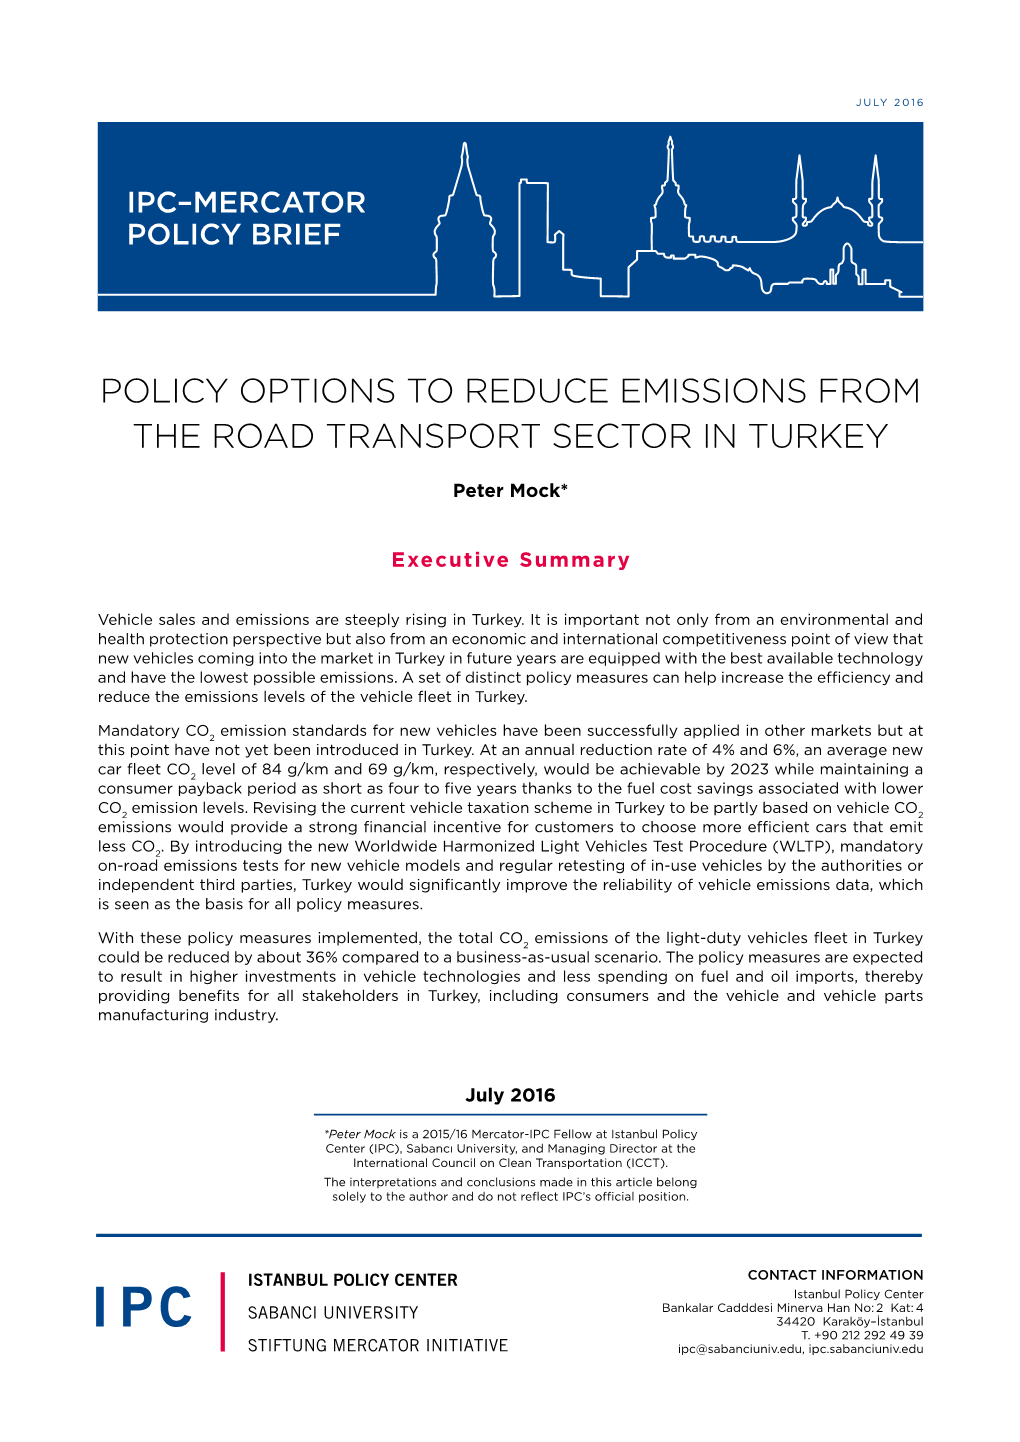 Policy Options to Reduce Emissions from the Road Transport Sector in Turkey